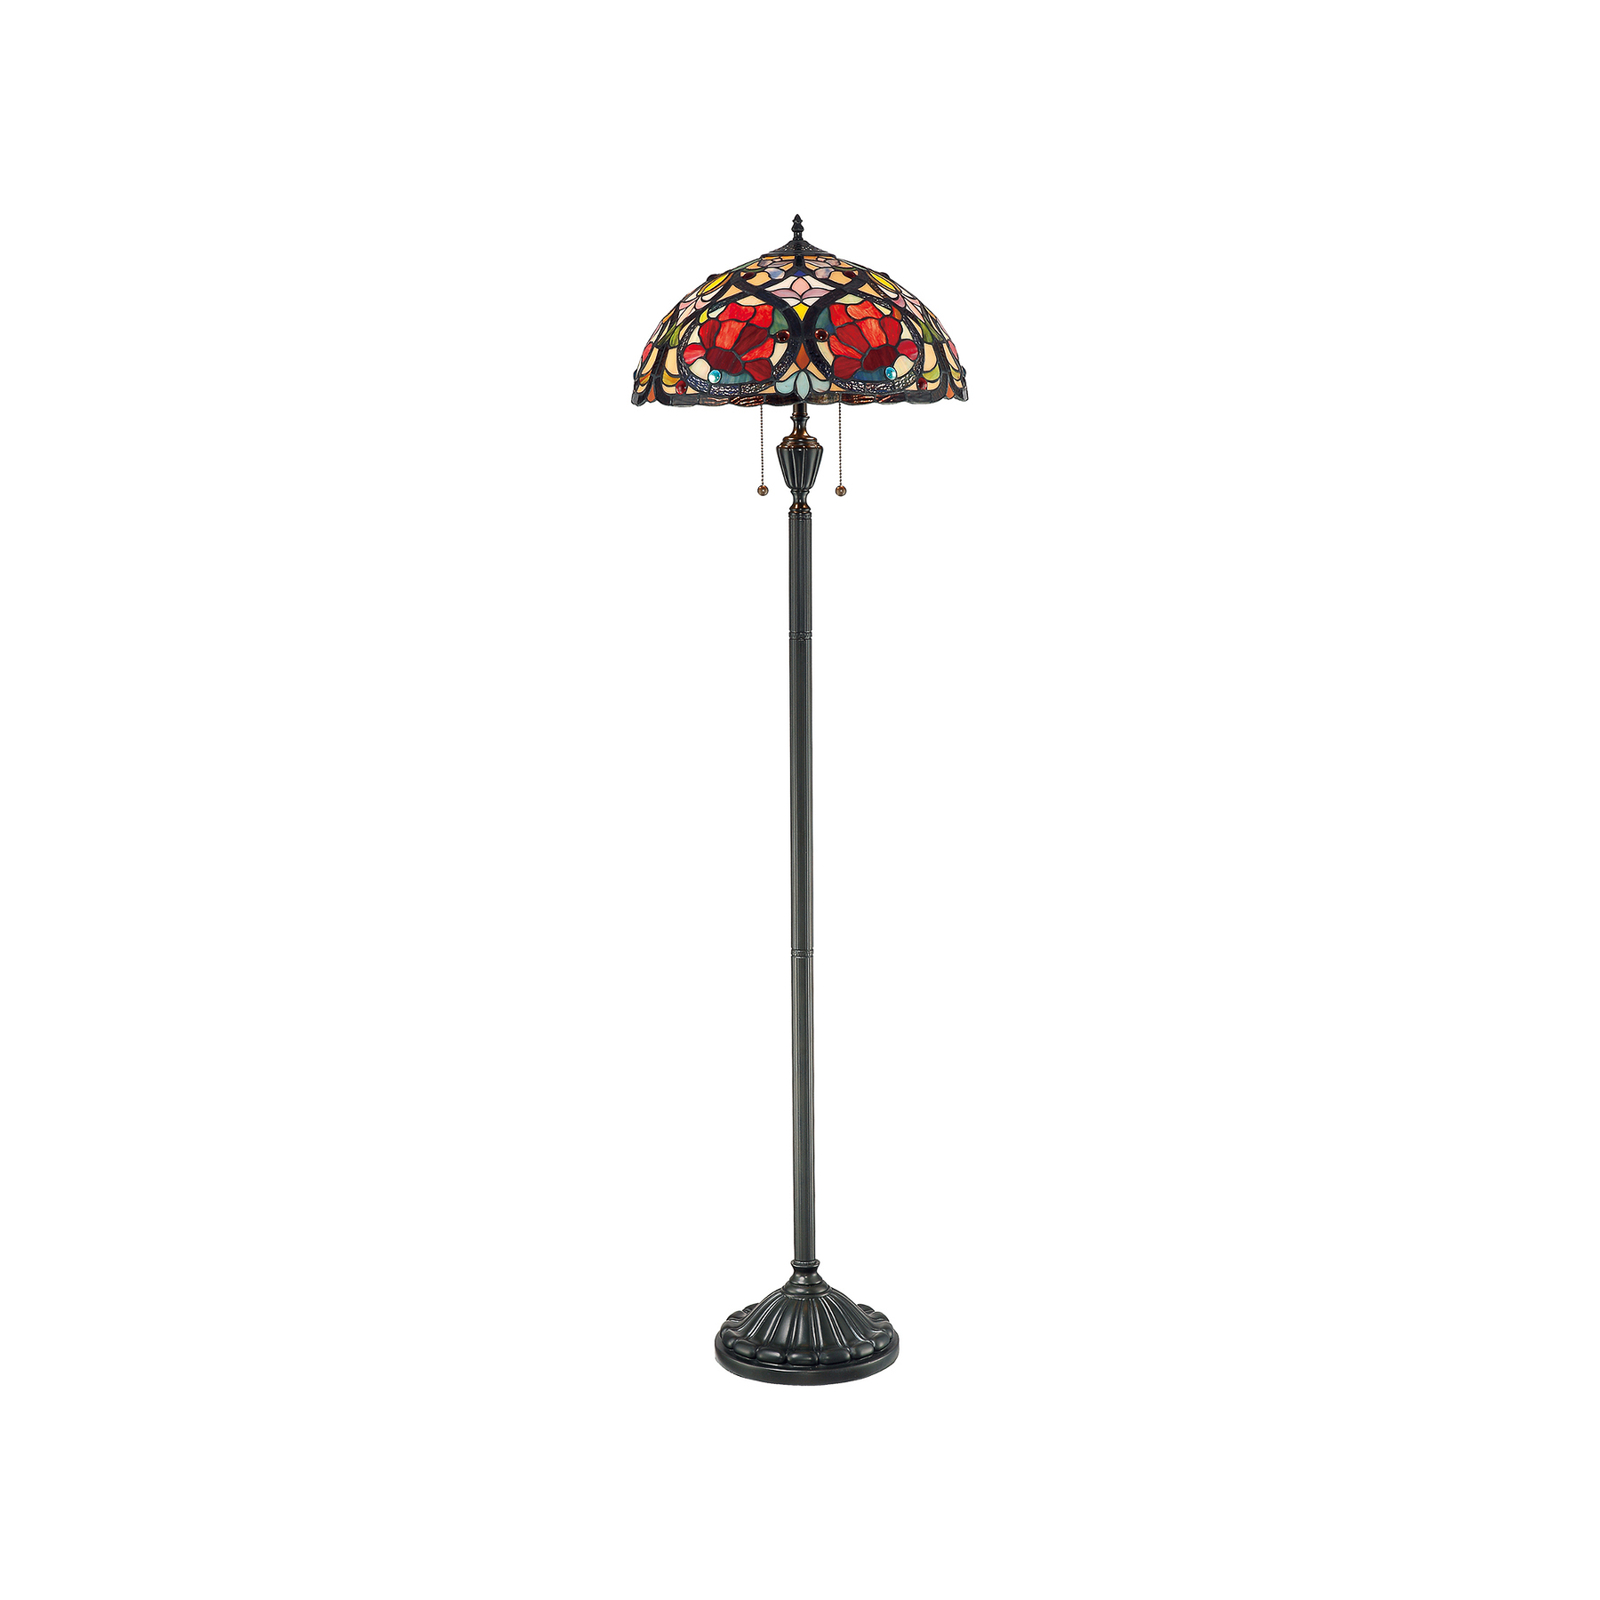 Larissa floor lamp with a Tiffany-style lampshade